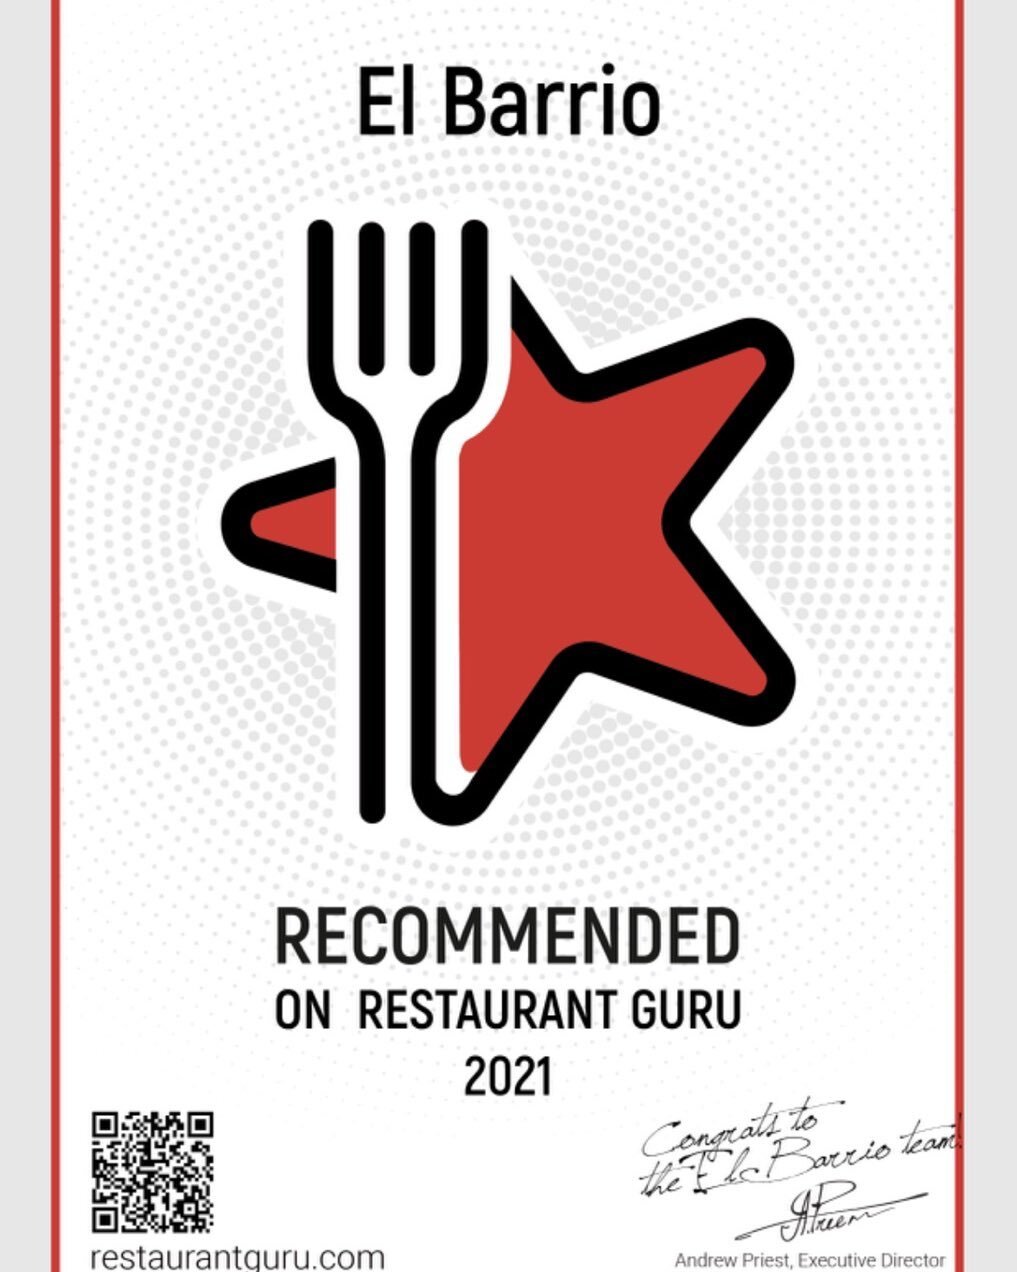 THANK YOU, @restaurantguru_ for this recognition. And thank you to all our phenomenal patrons for making it possible through your comments and ratings, so greatly appreciated. Upwards and onwards 🙏❤️